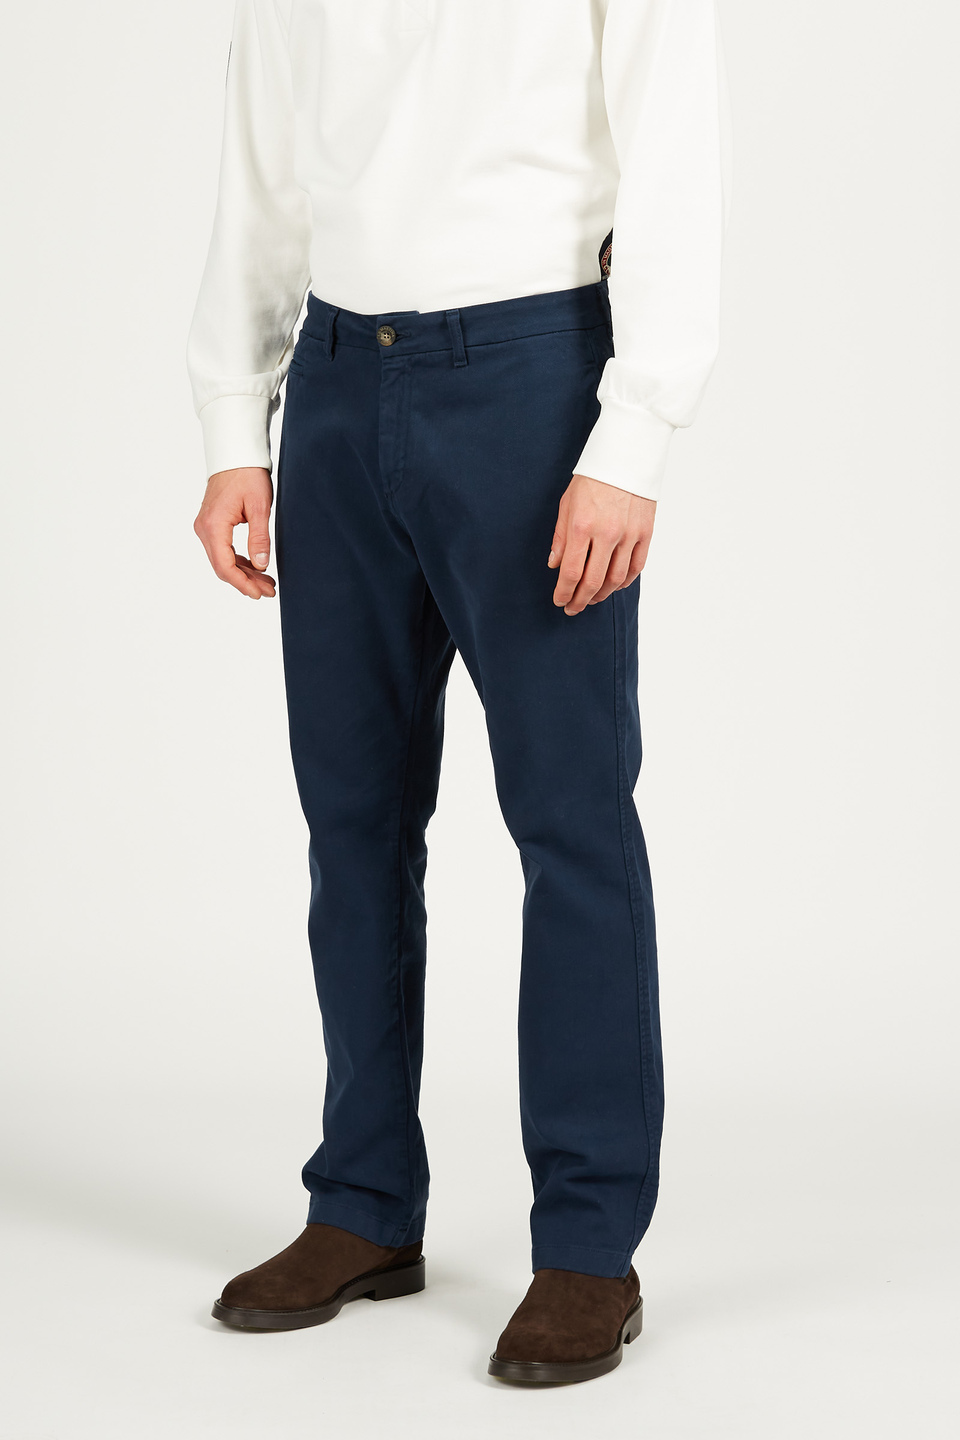 Men’s trousers in cotton regular fit chino model | La Martina - Official Online Shop